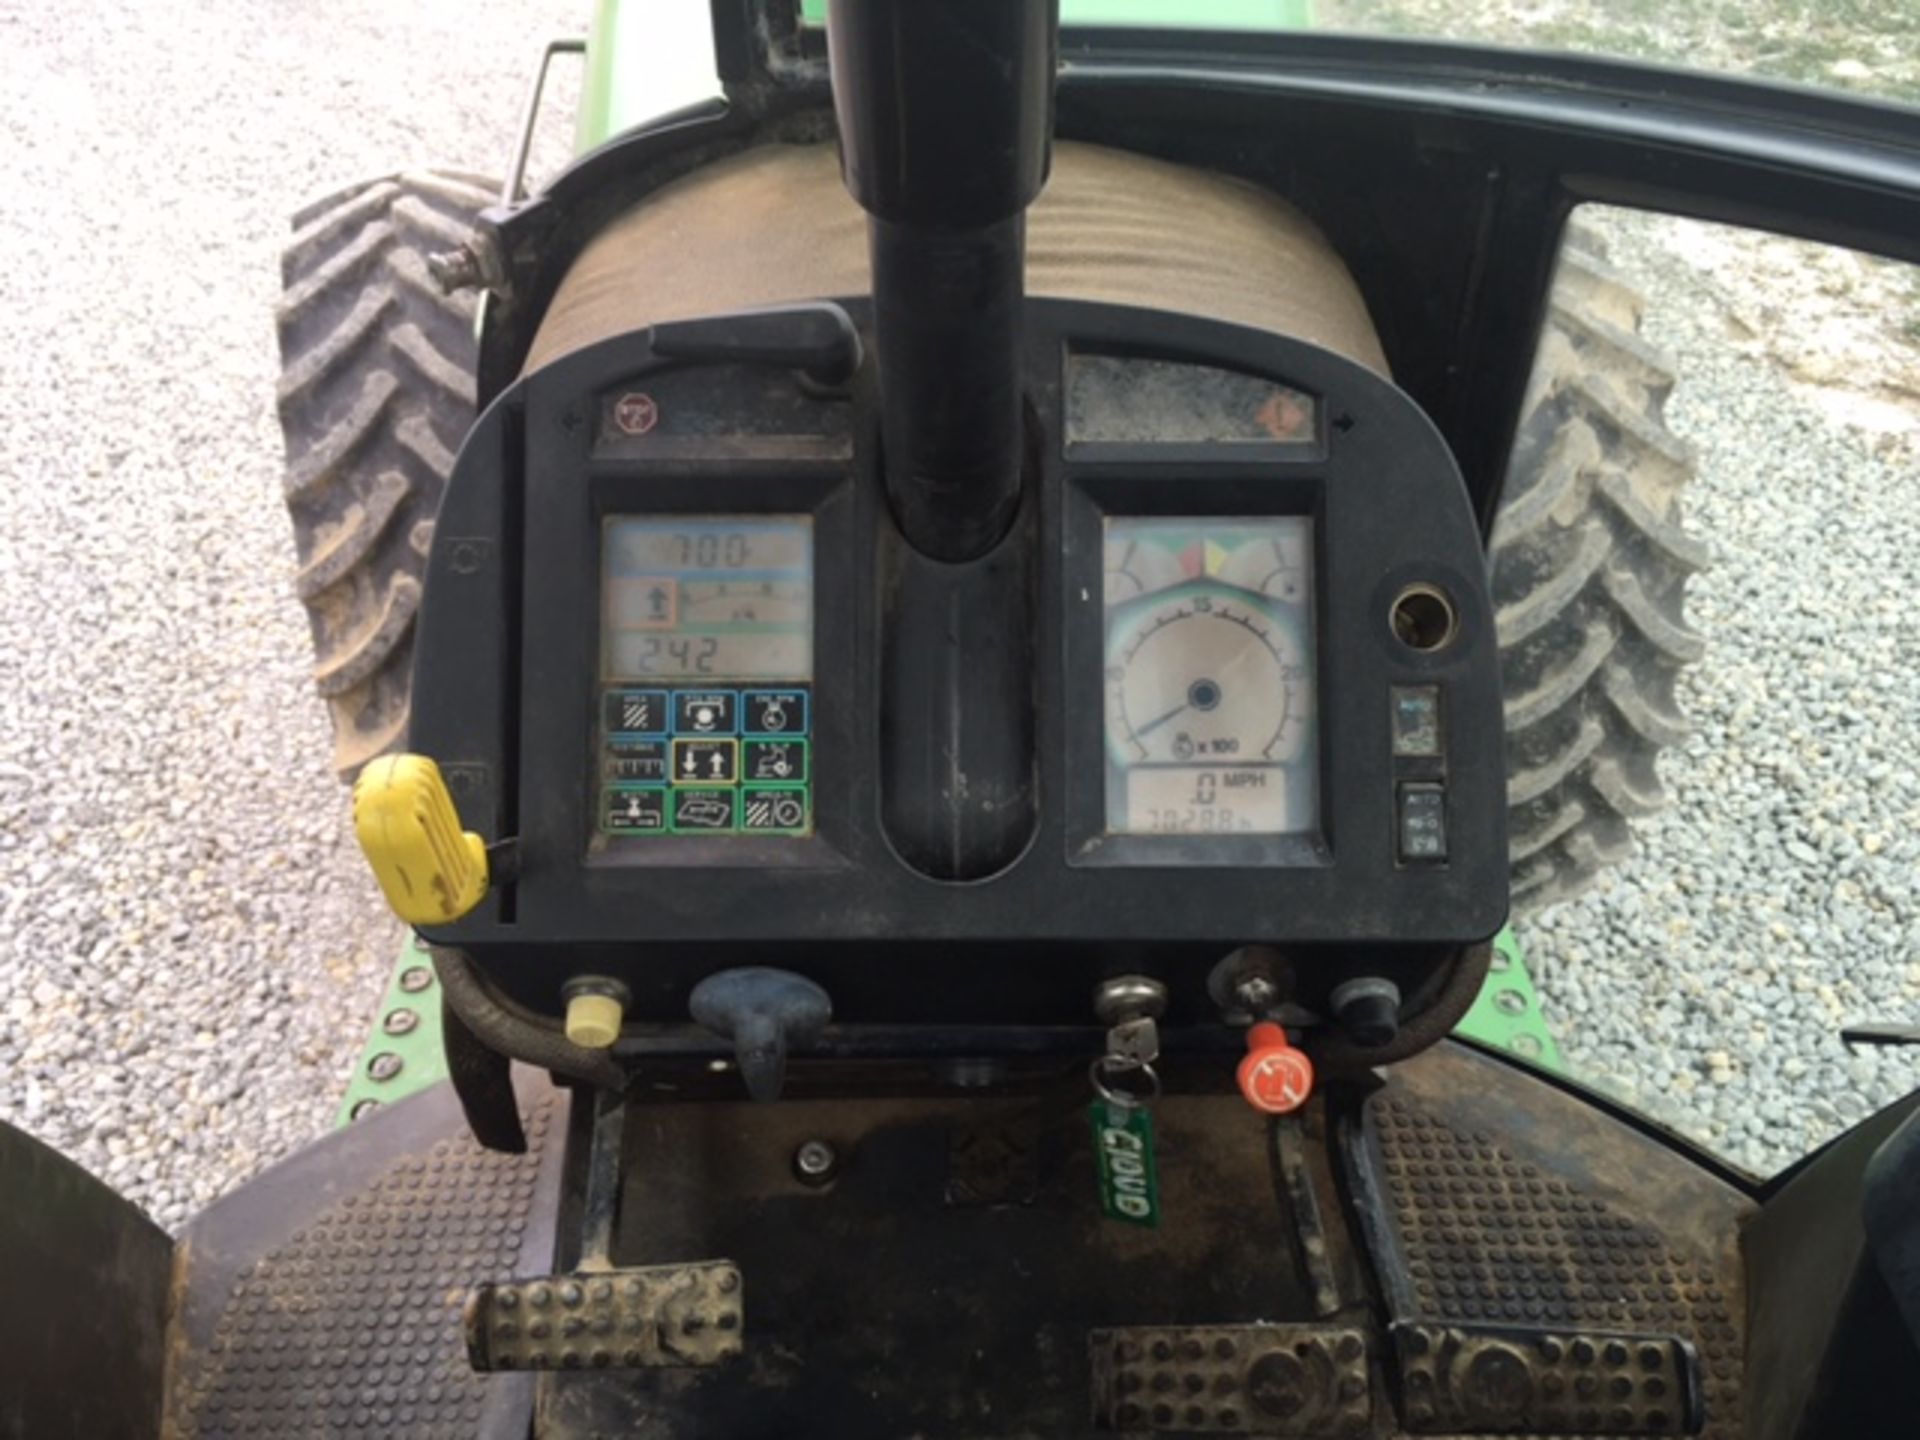 John Deere 4555 Tractor, MFWD, weights, duals, 15 speed powershift, 3pt., 3 hyd. remotes, big 1000 - Image 12 of 13